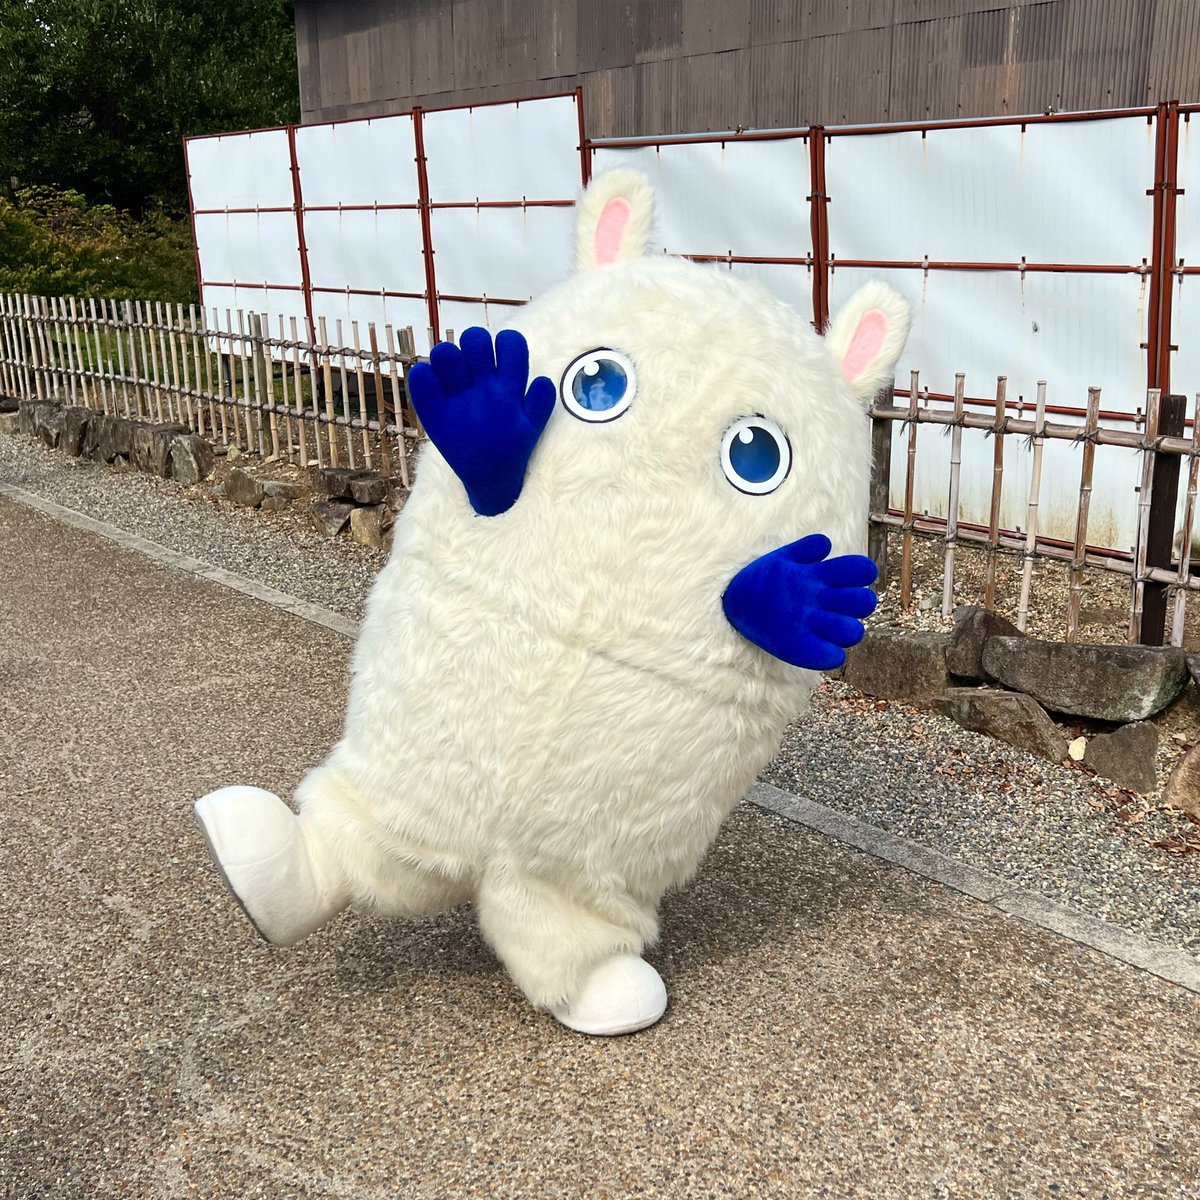 The other day I ran into Tanamin, a white hairy fairy who cures sickness with its big blue hands, and is the mascot of Mitsubishi Tanabe Pharmaceuticals.